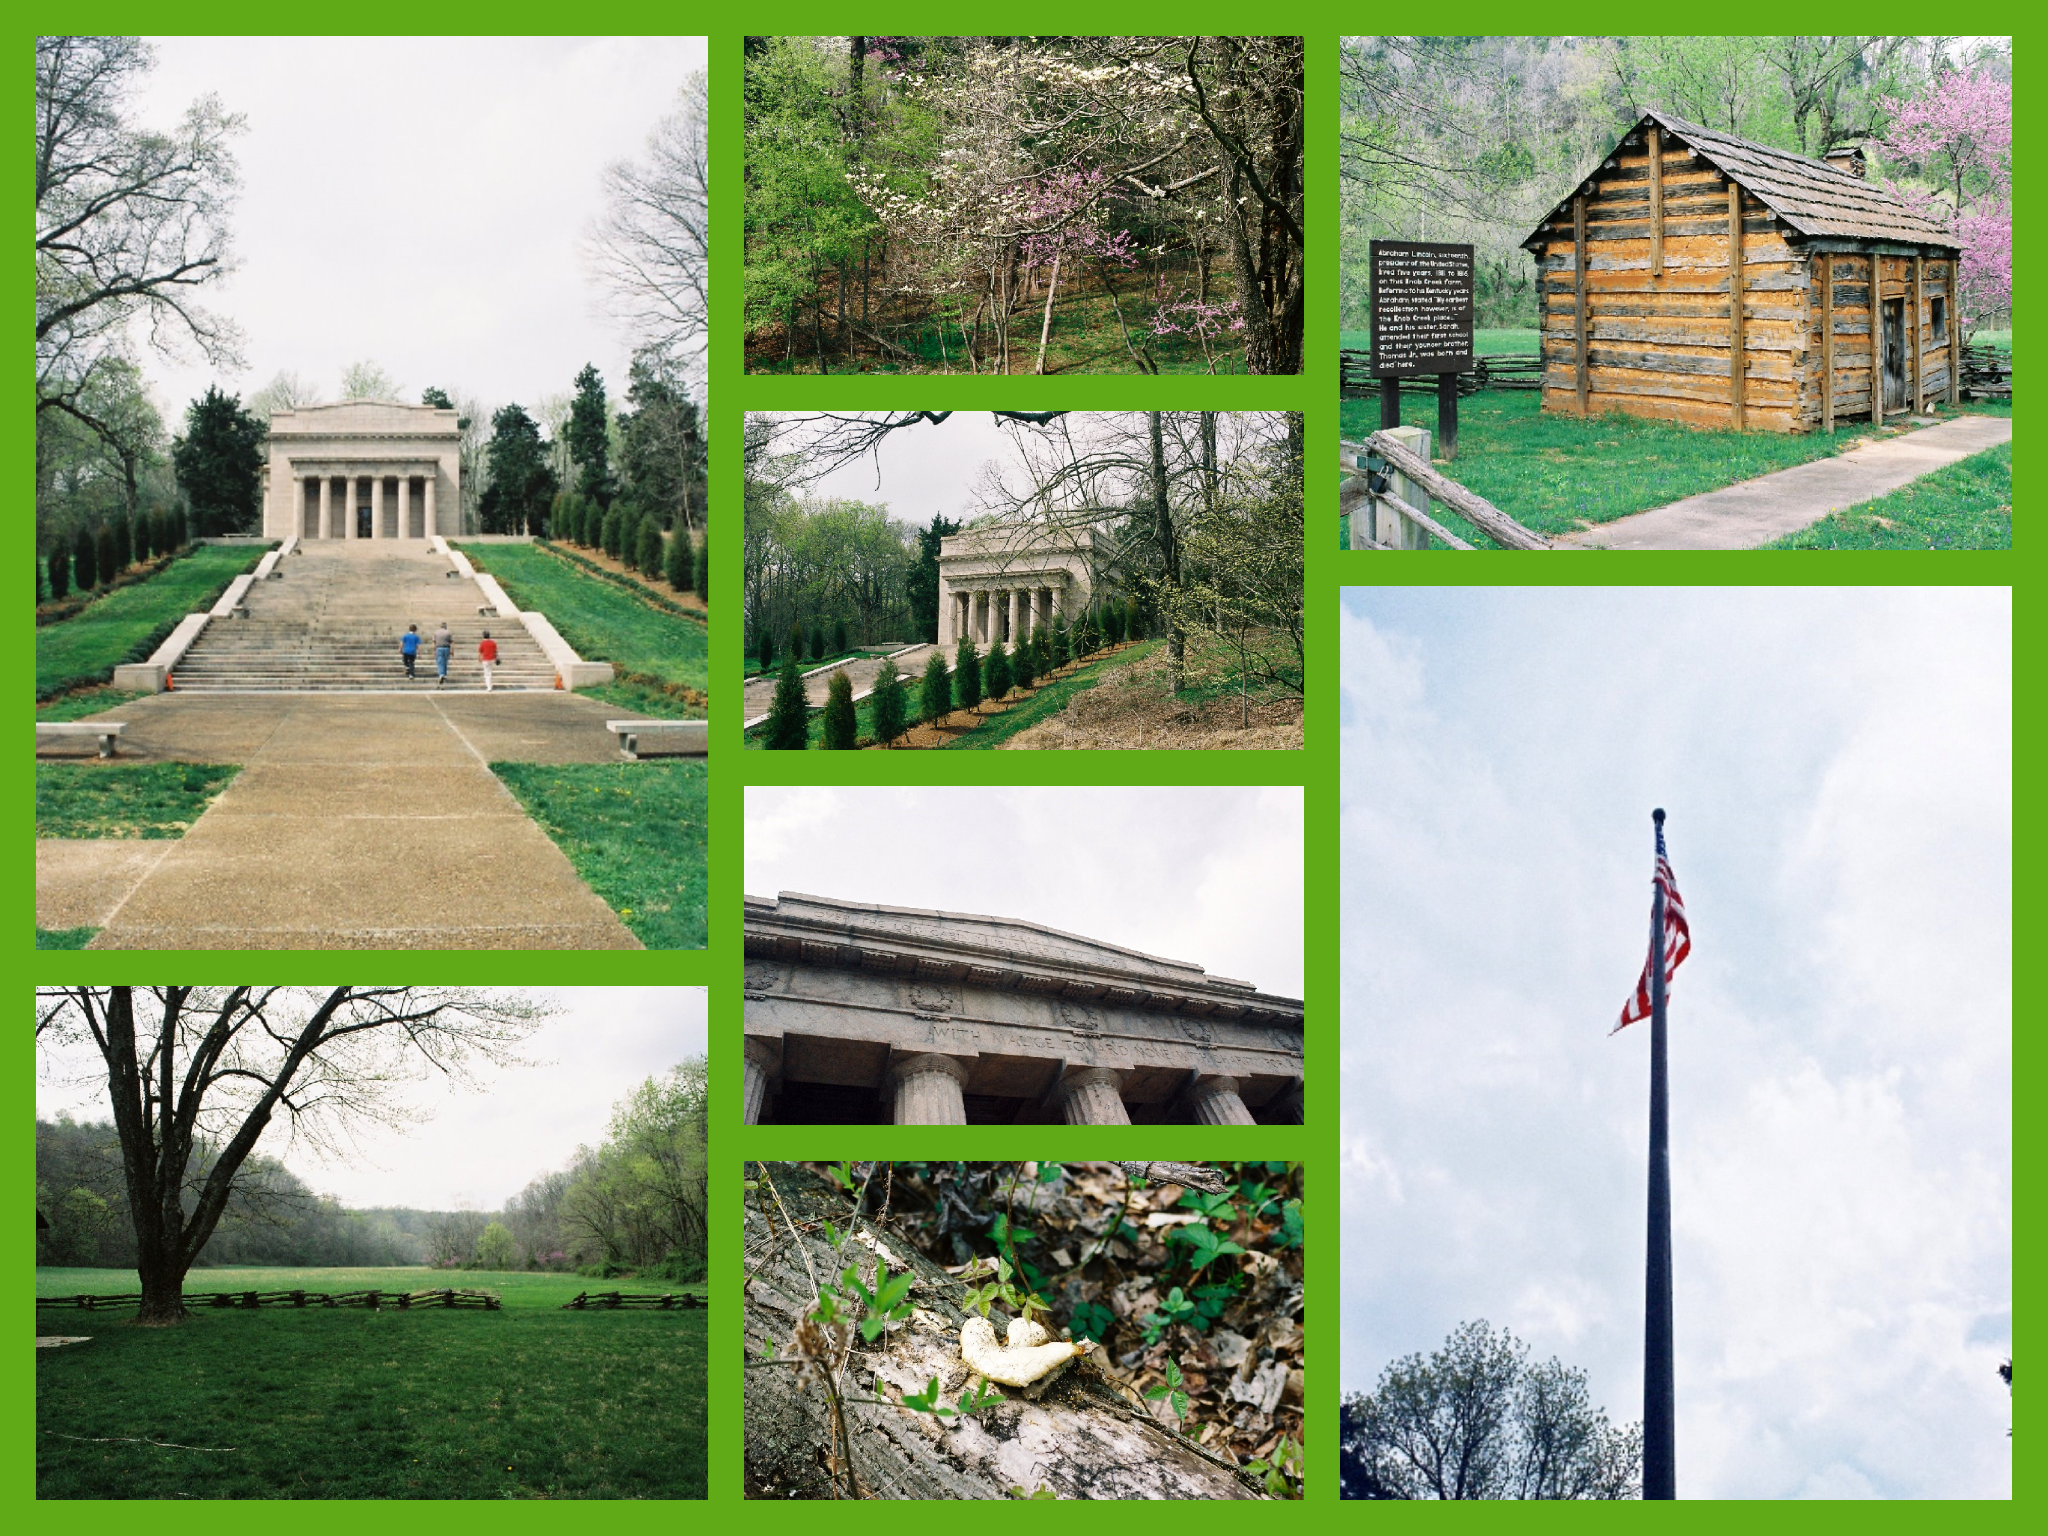 Abraham Lincoln Birthplace National Historic Park (Hodgenville, Kentucky)